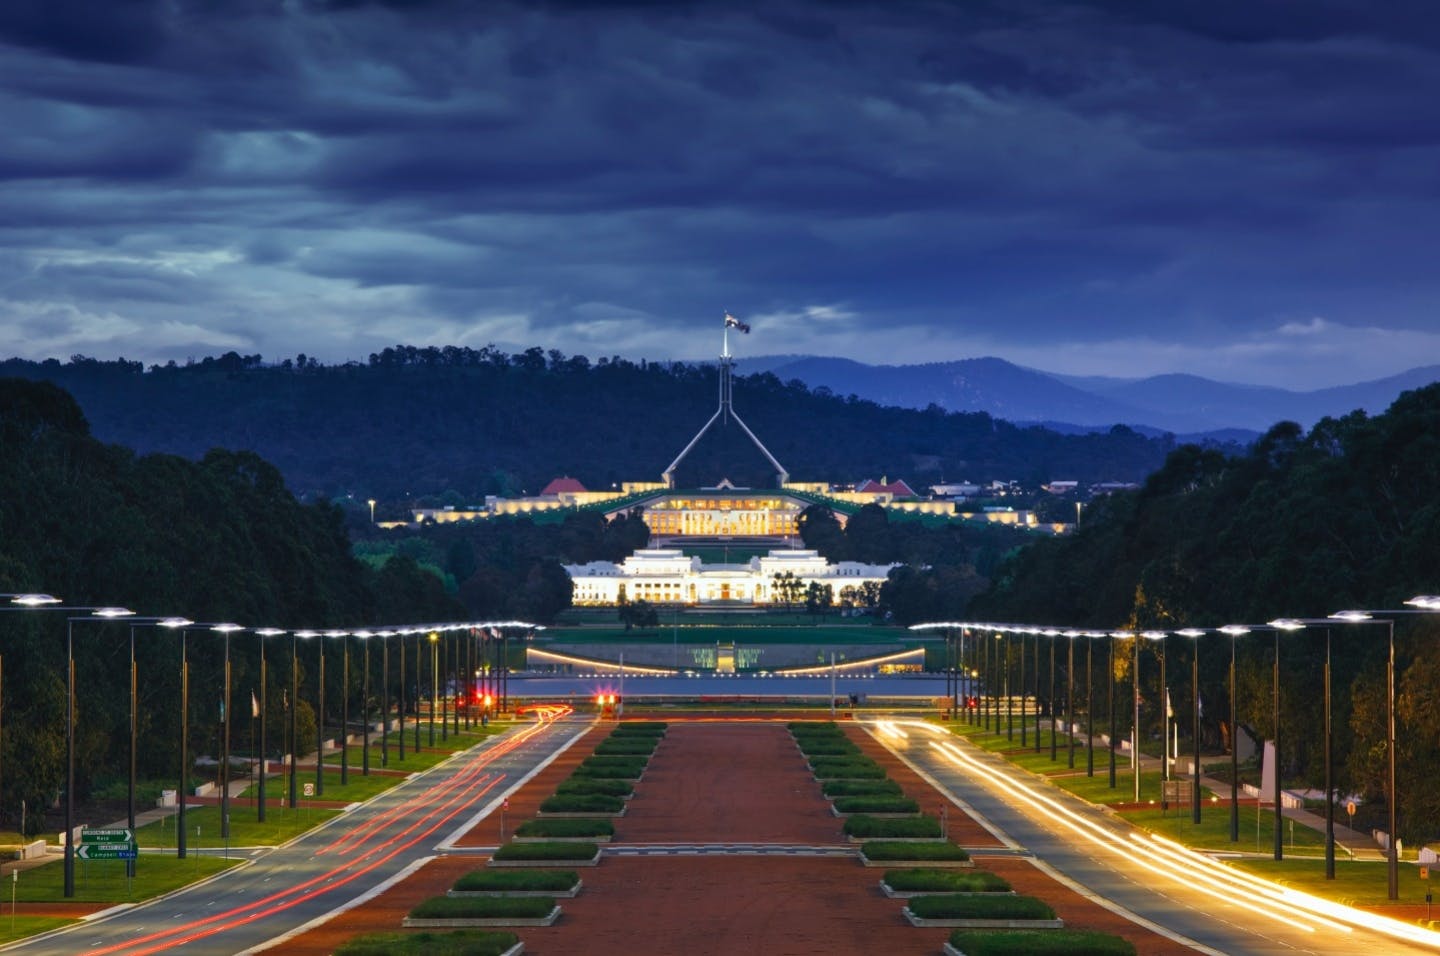 Australian Parliament house in Canberra lit up at night